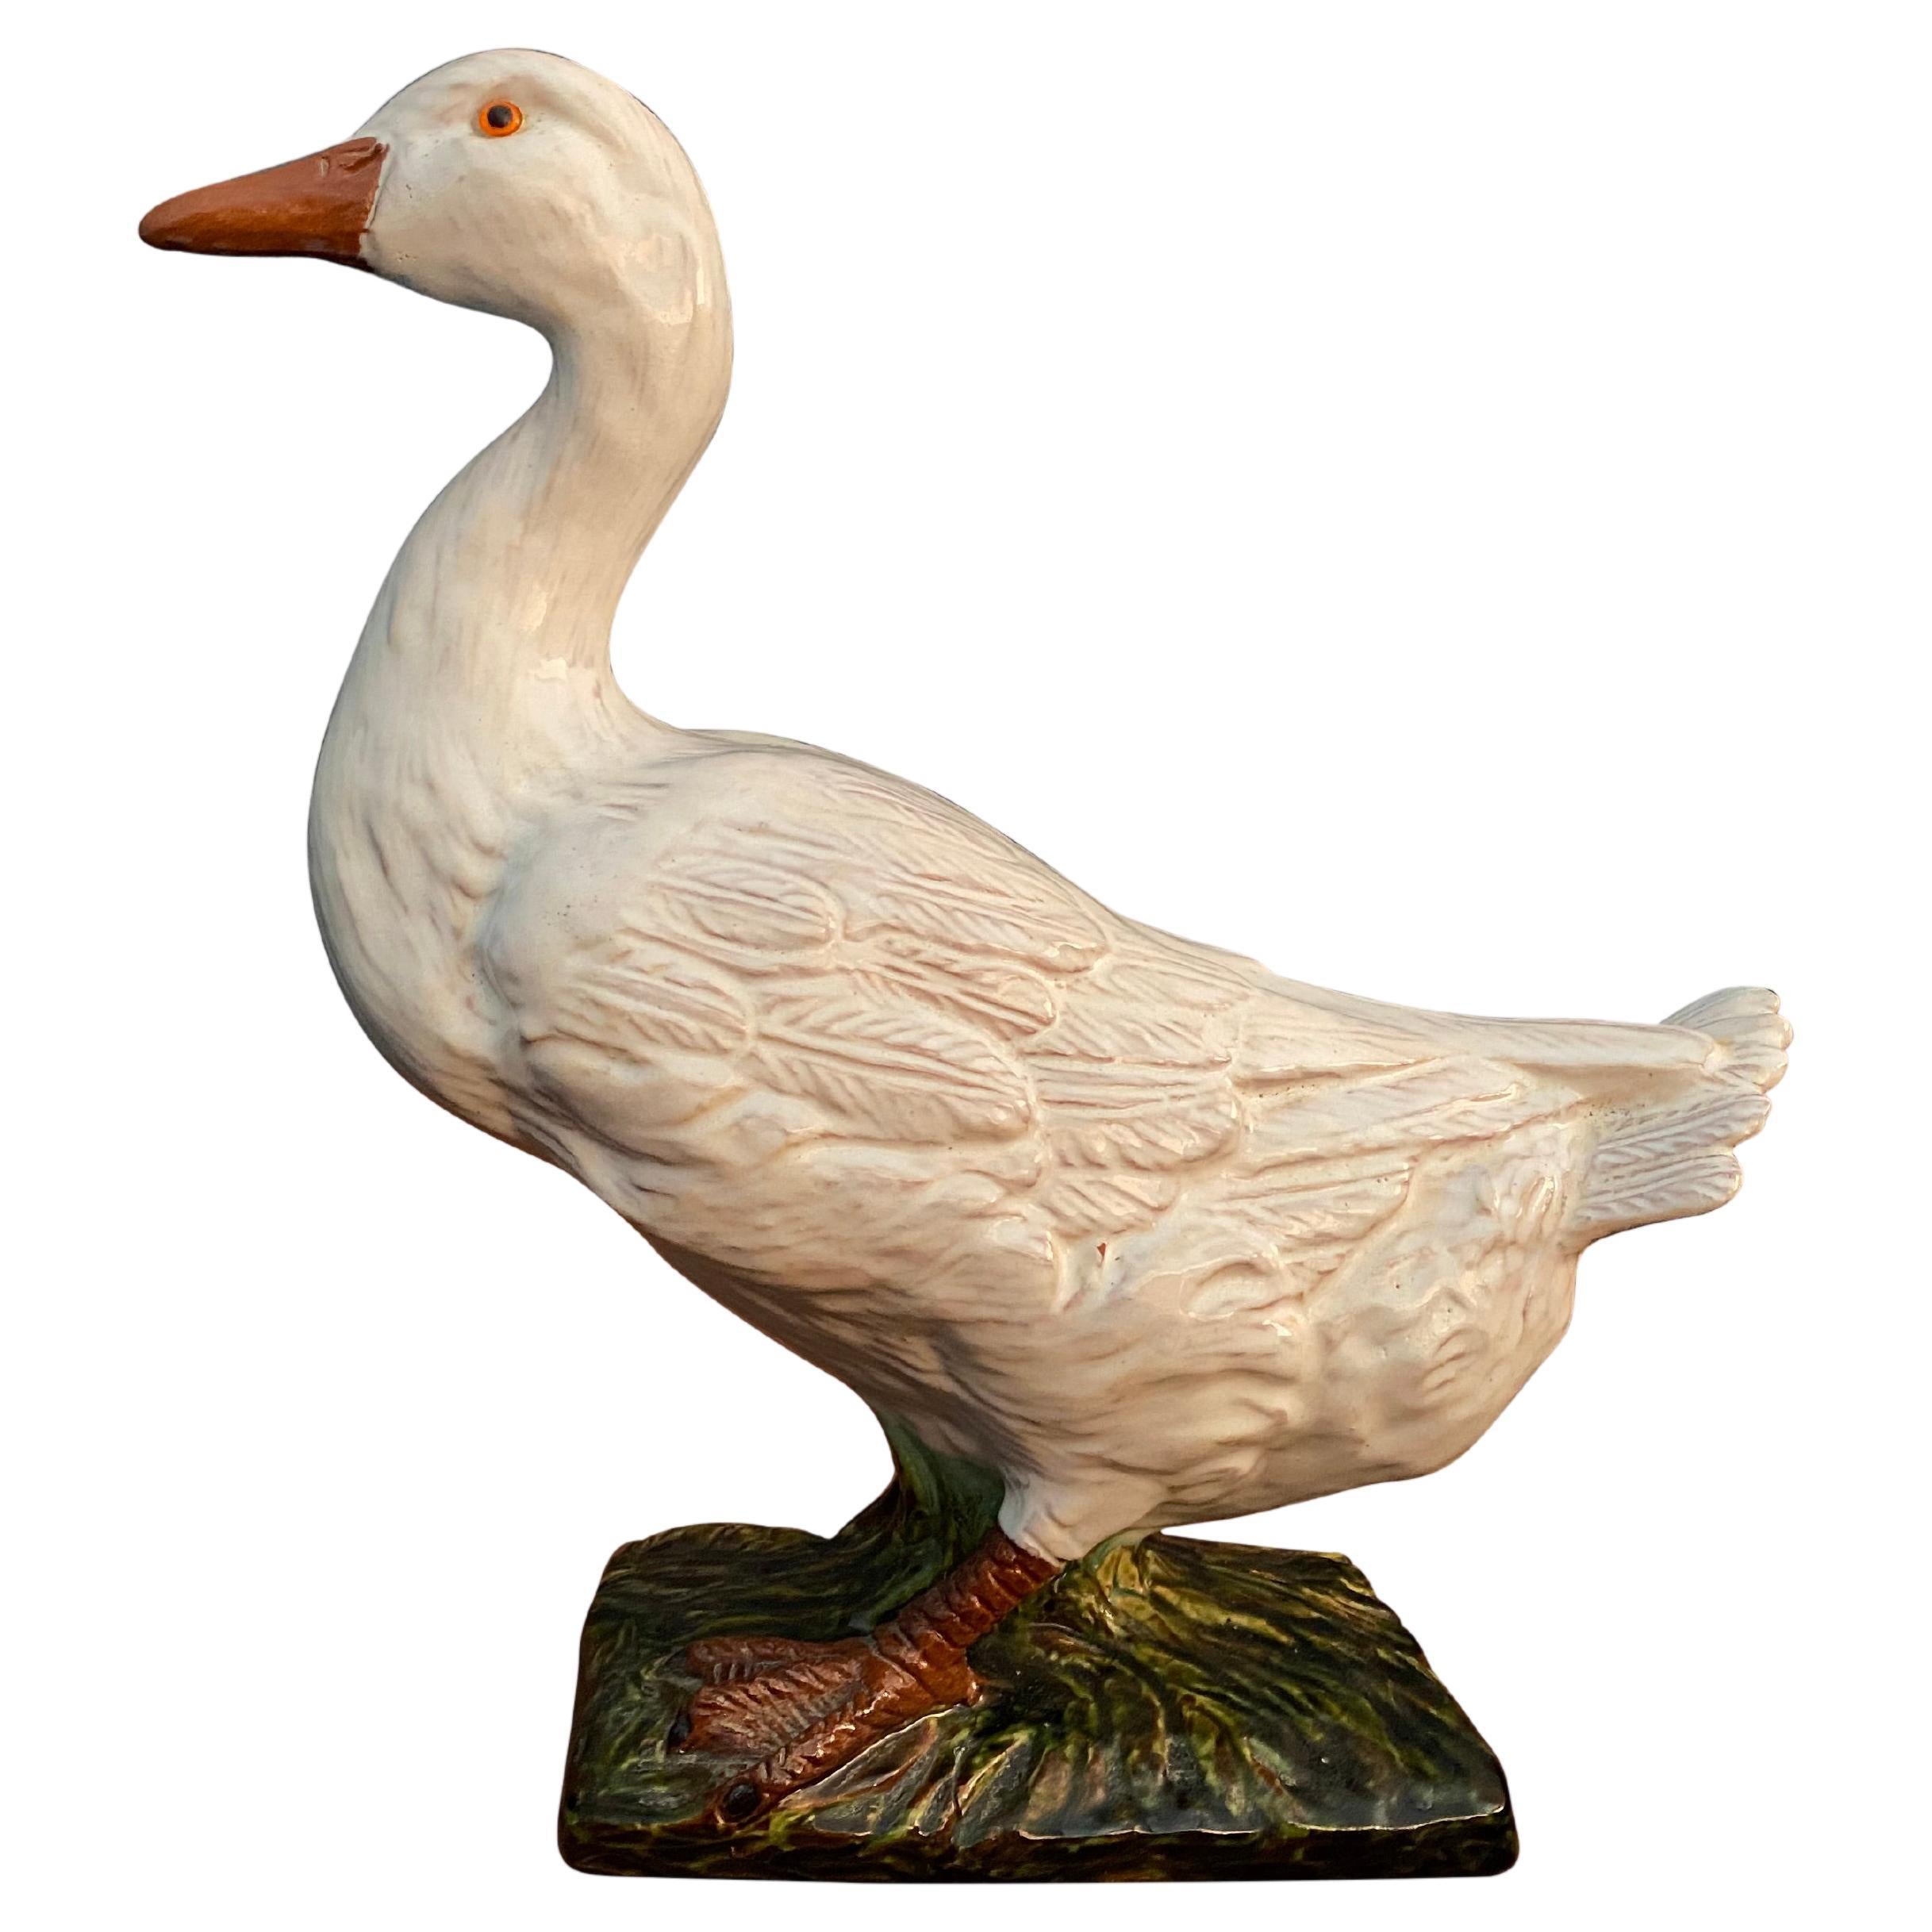 19th Century French Earthenware Duck Sculpture from Bavent in Normandy